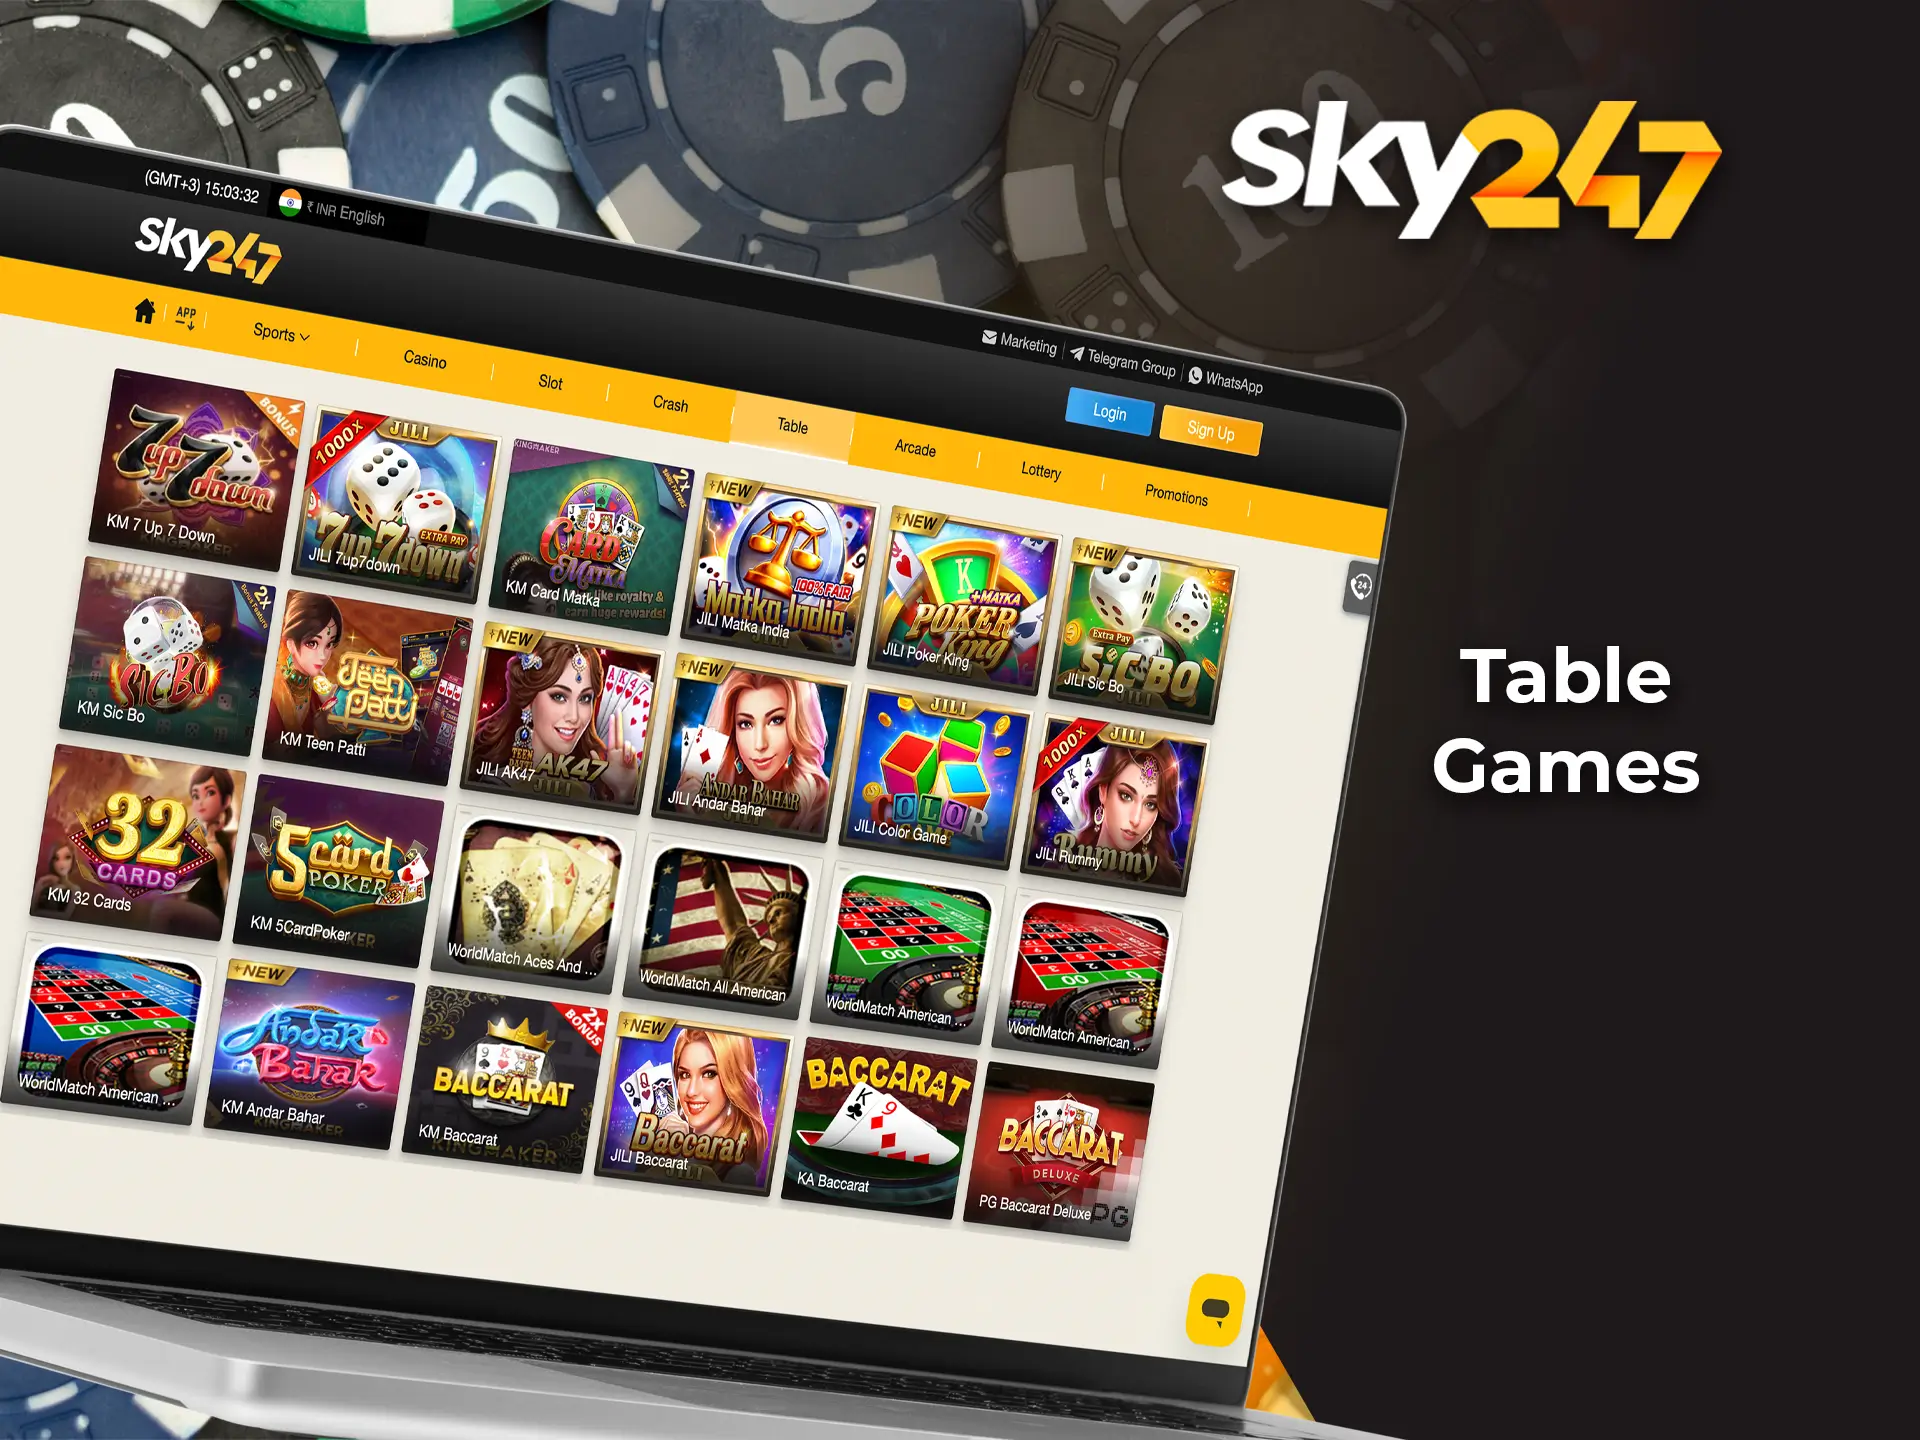 Play at a virtual table with other players and win at Sky247 Casino.